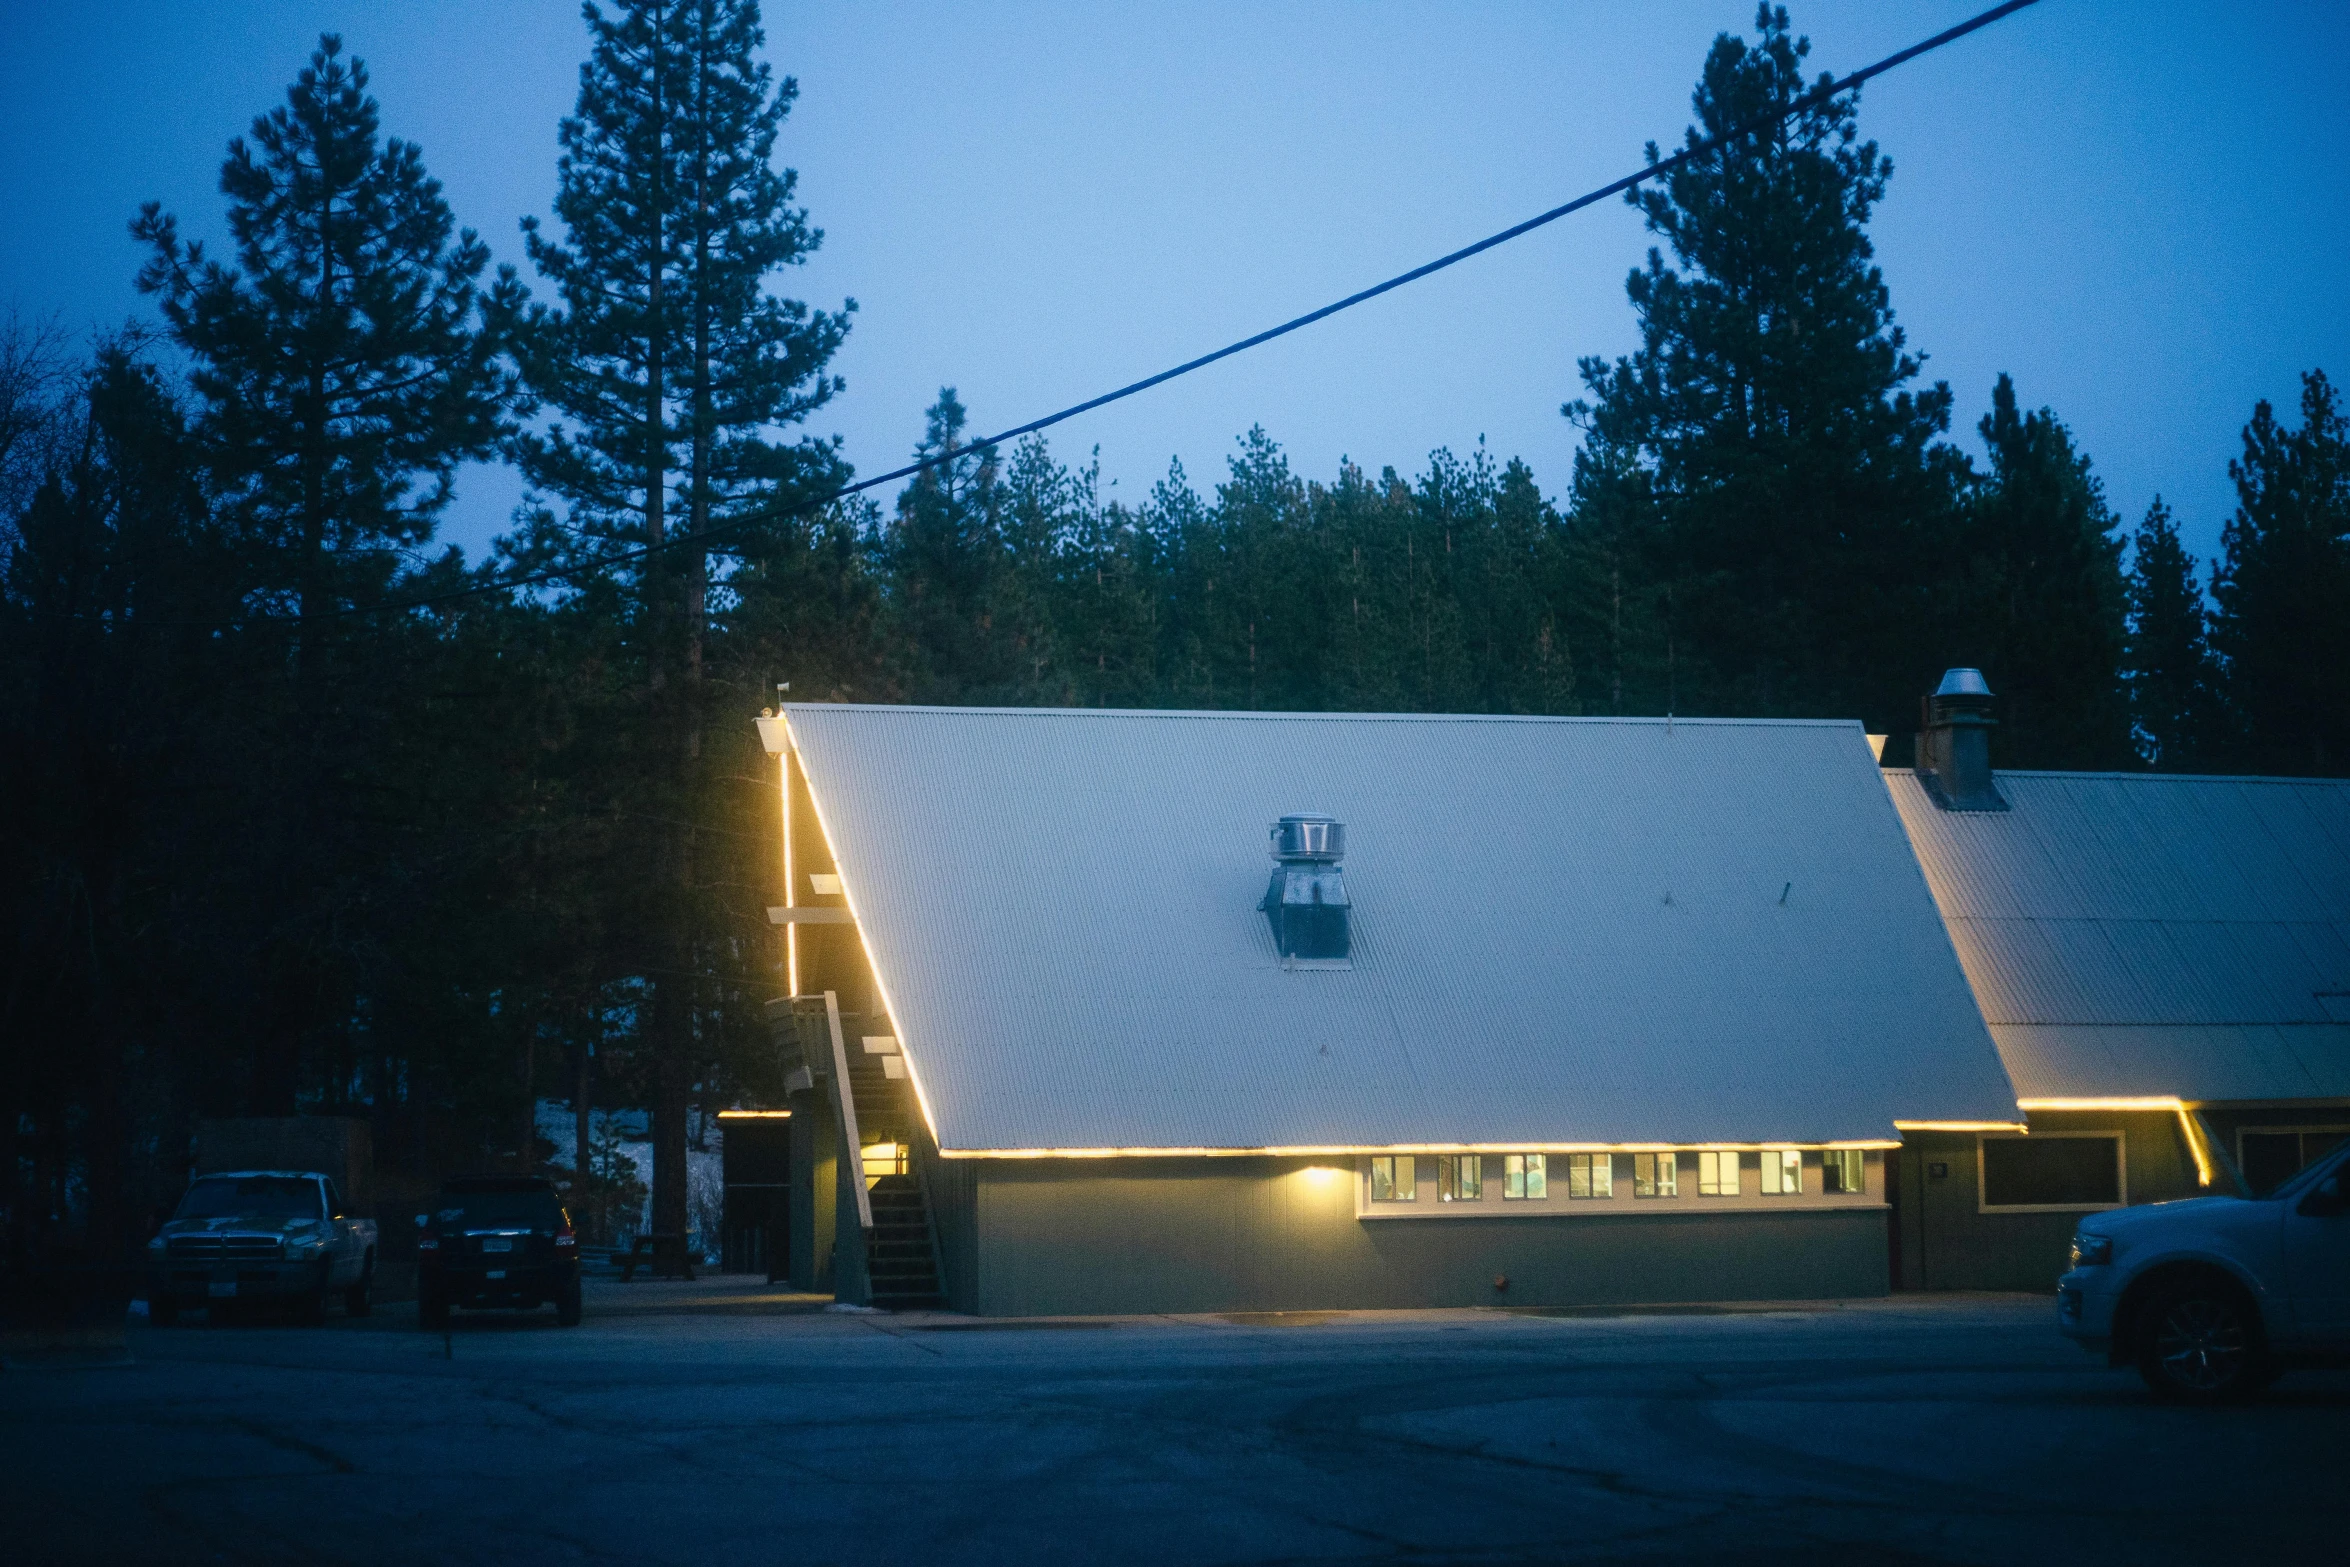 a building lit up at night in a parking lot, by Ryan Pancoast, big bear lake california, roofed forest, profile image, diner